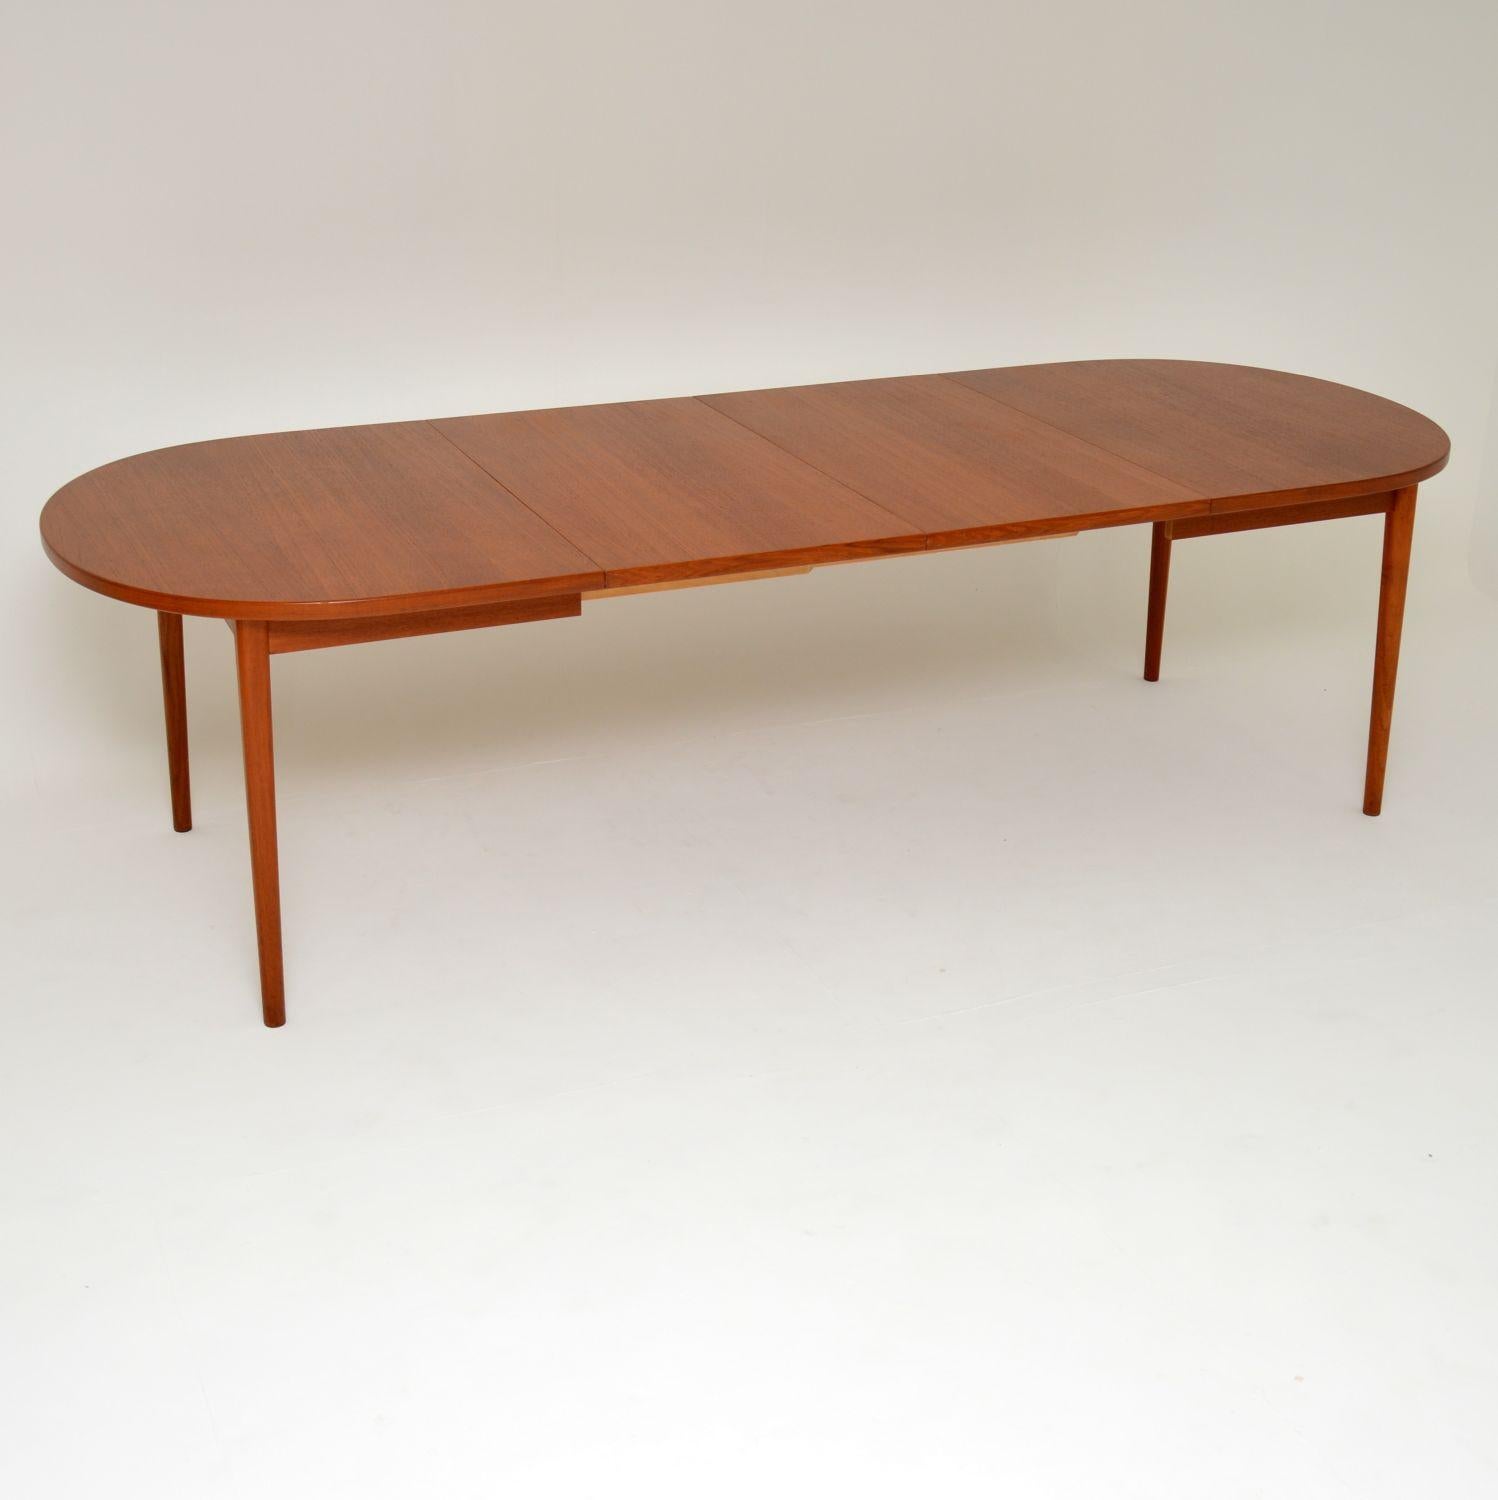 A top quality, stylish and very large vintage teak dining table. This was made in Sweden by Troeds and was designed by Nils Jonsson. It dates from the 1960s-1970s, and is in superb condition for its age. The top is beautiful and clean with barely a